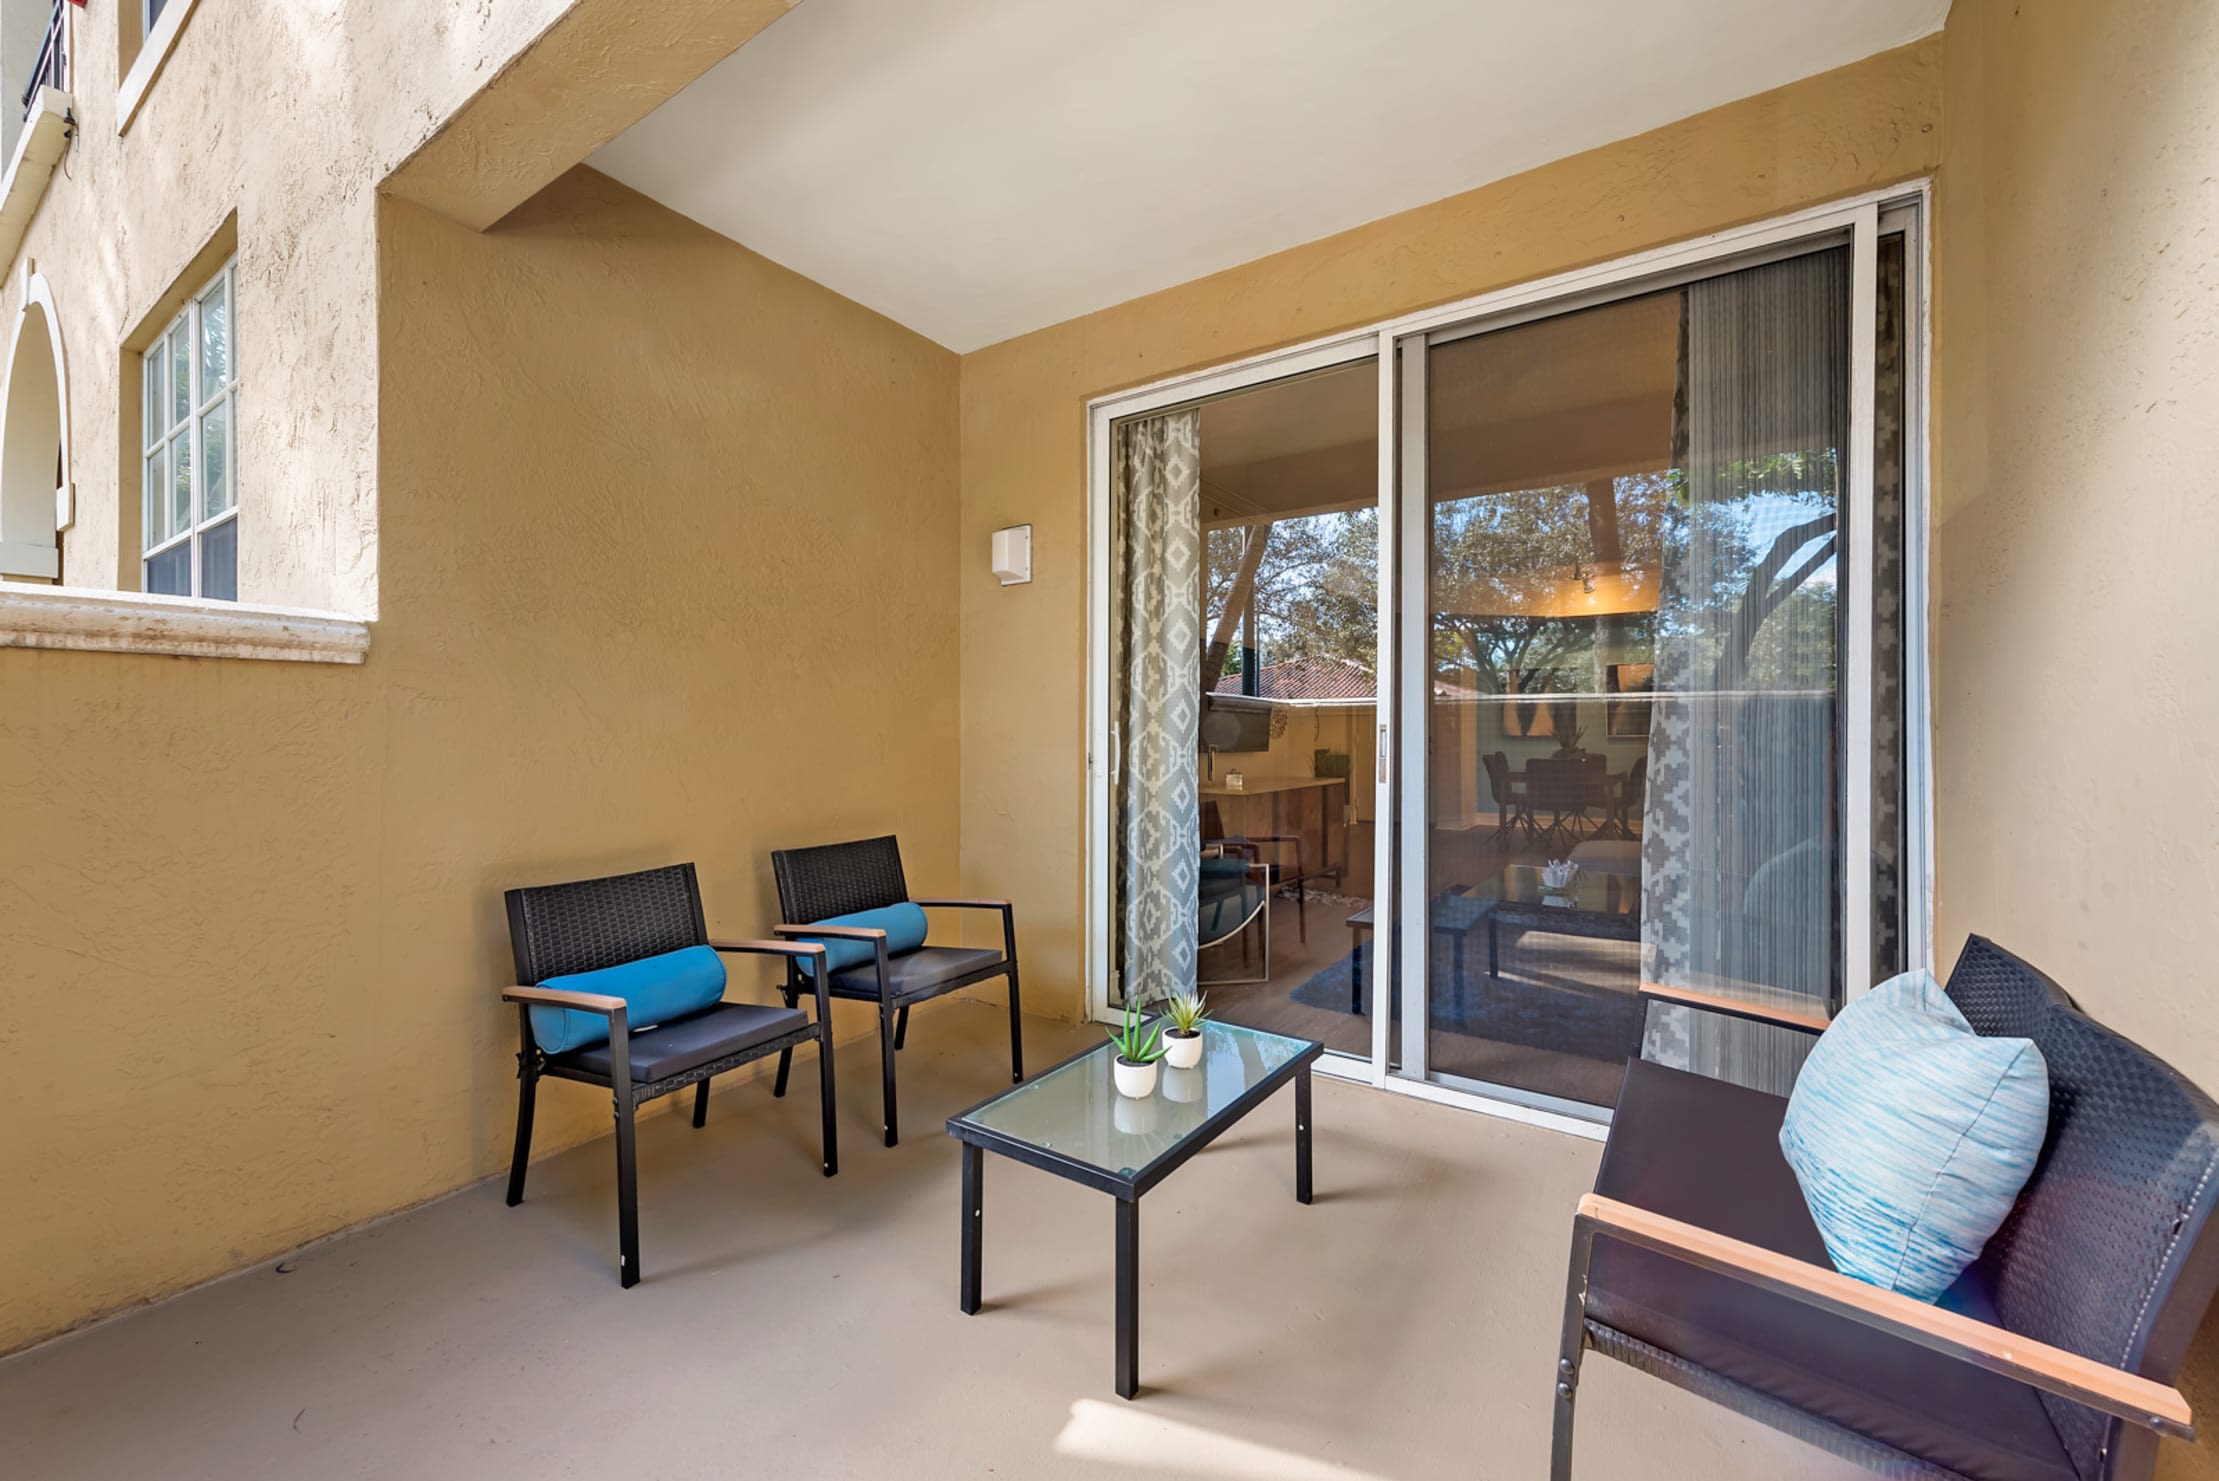 Private outdoor patio space at Fountain House Apartments in Miami Lakes, Florida